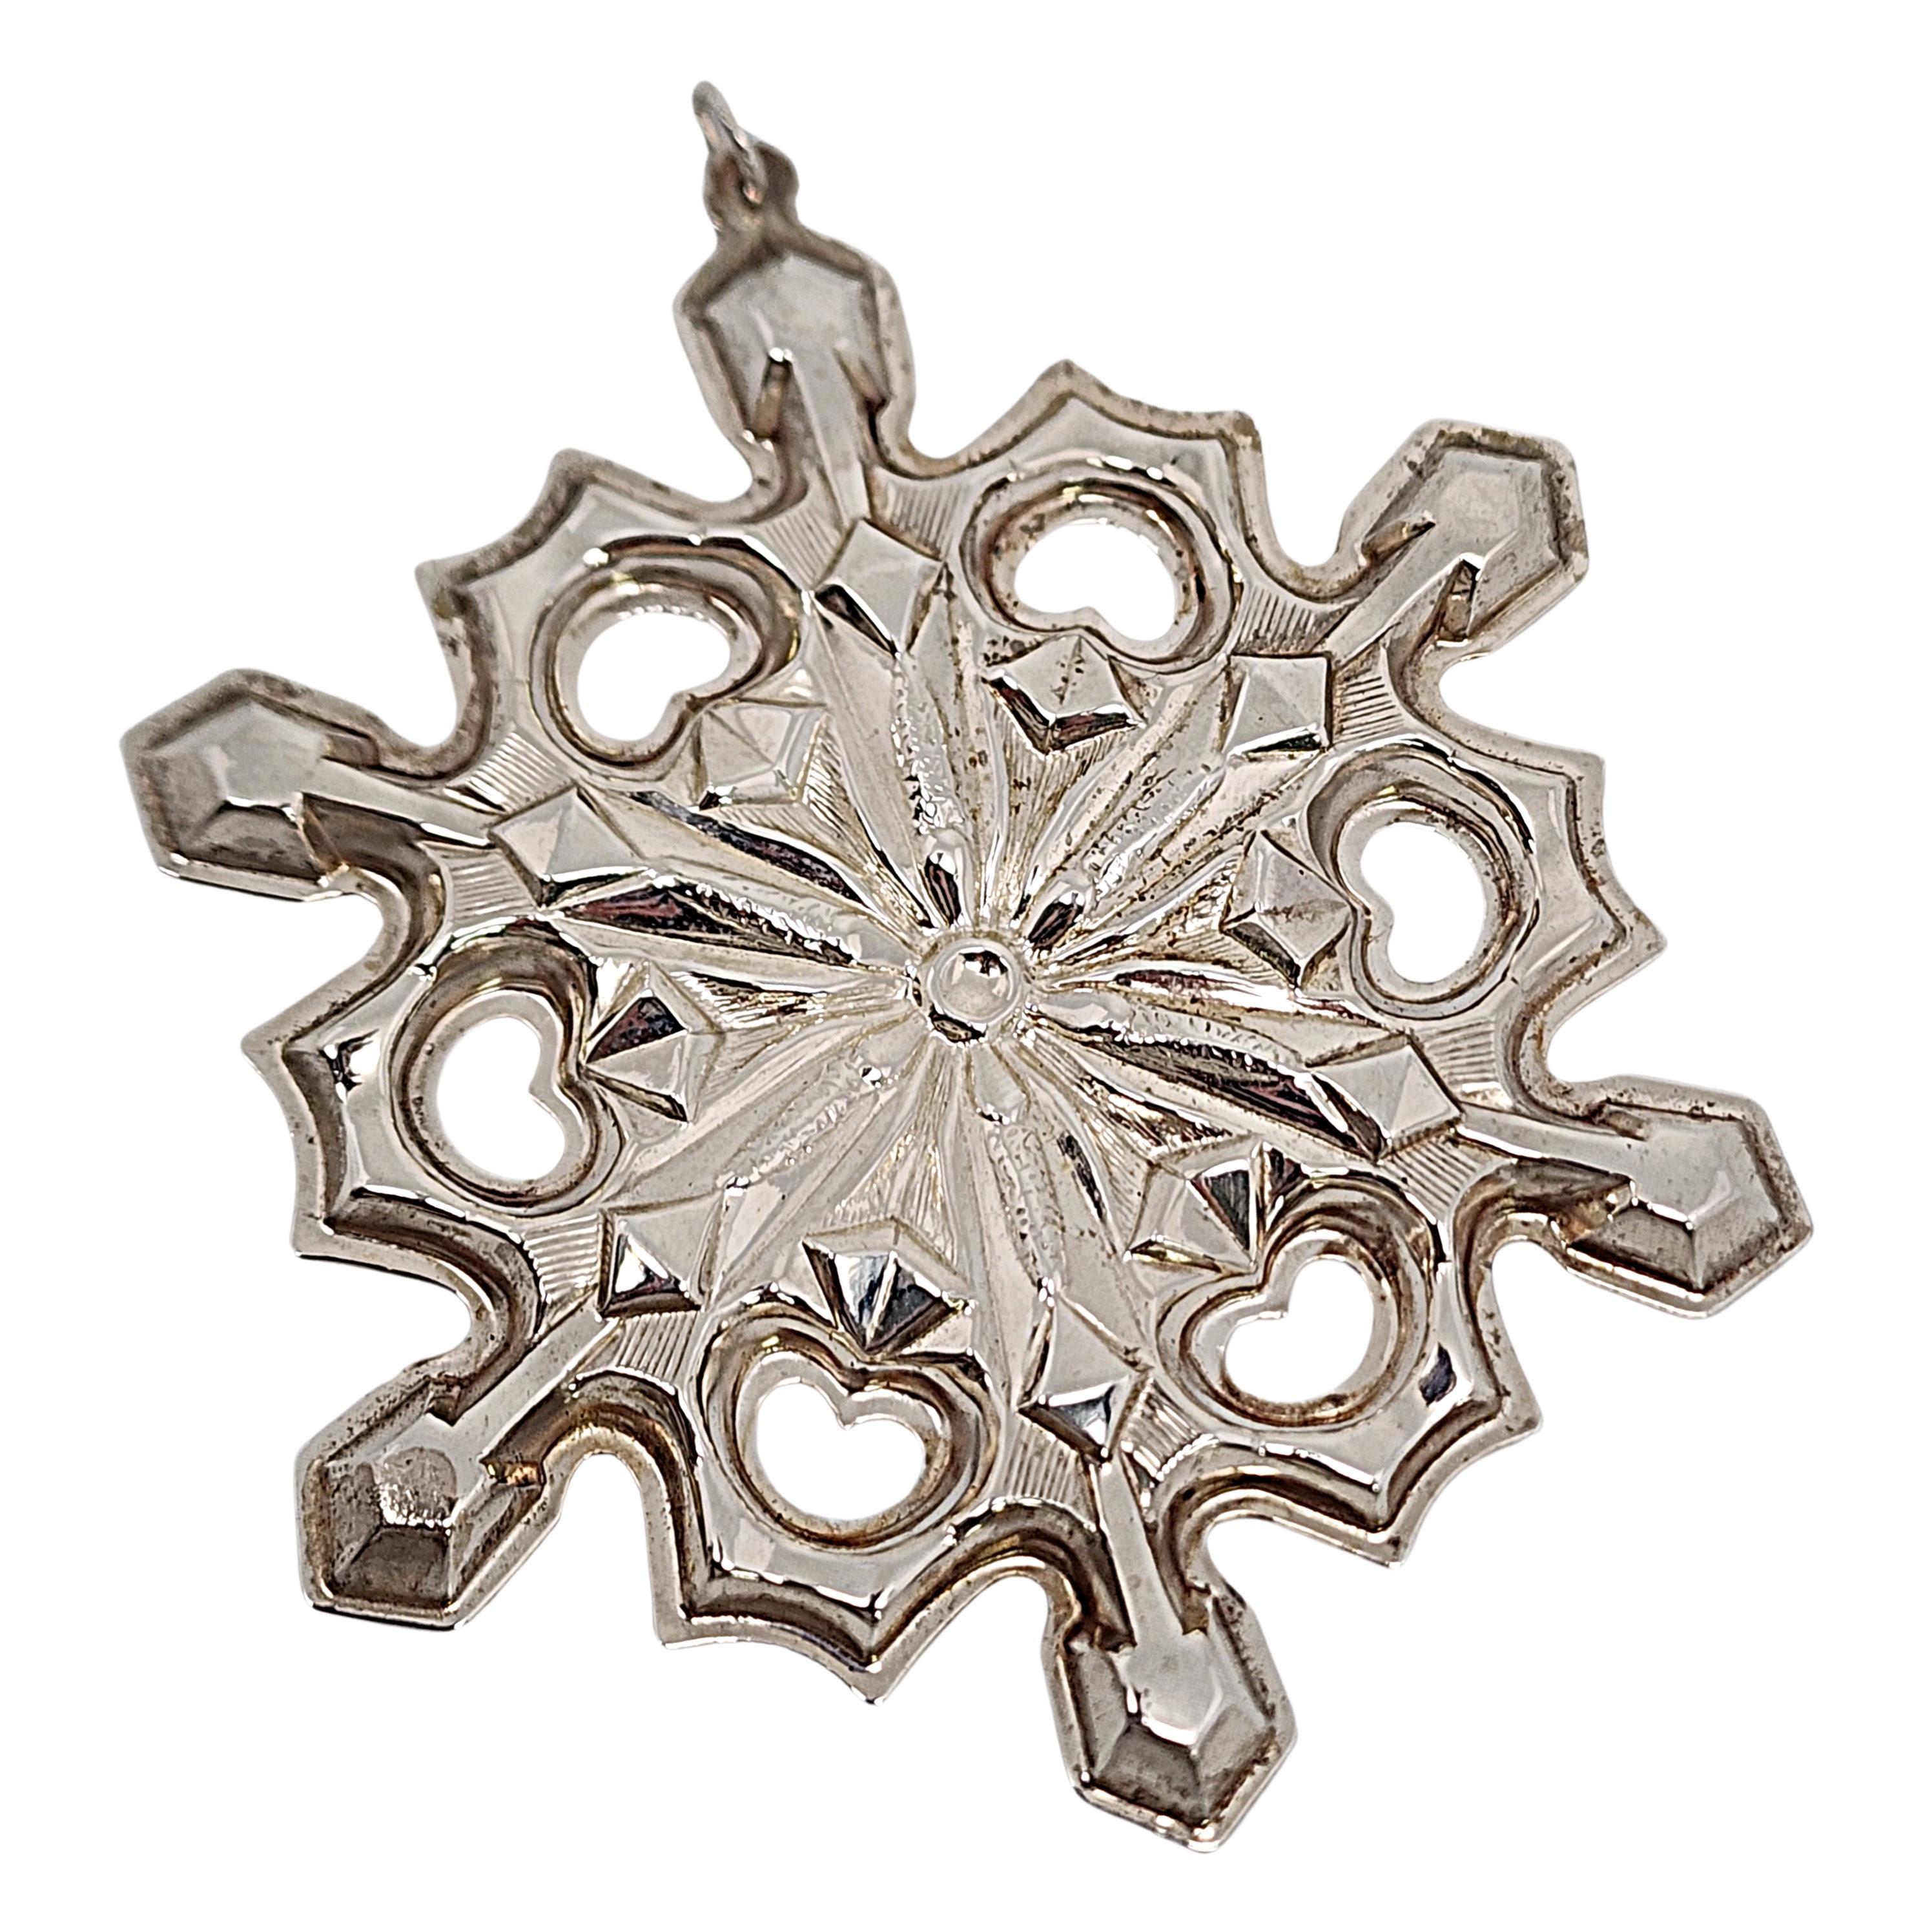 Women's or Men's 1979 Gorham Sterling Silver Snowflake Ornament #15644 For Sale